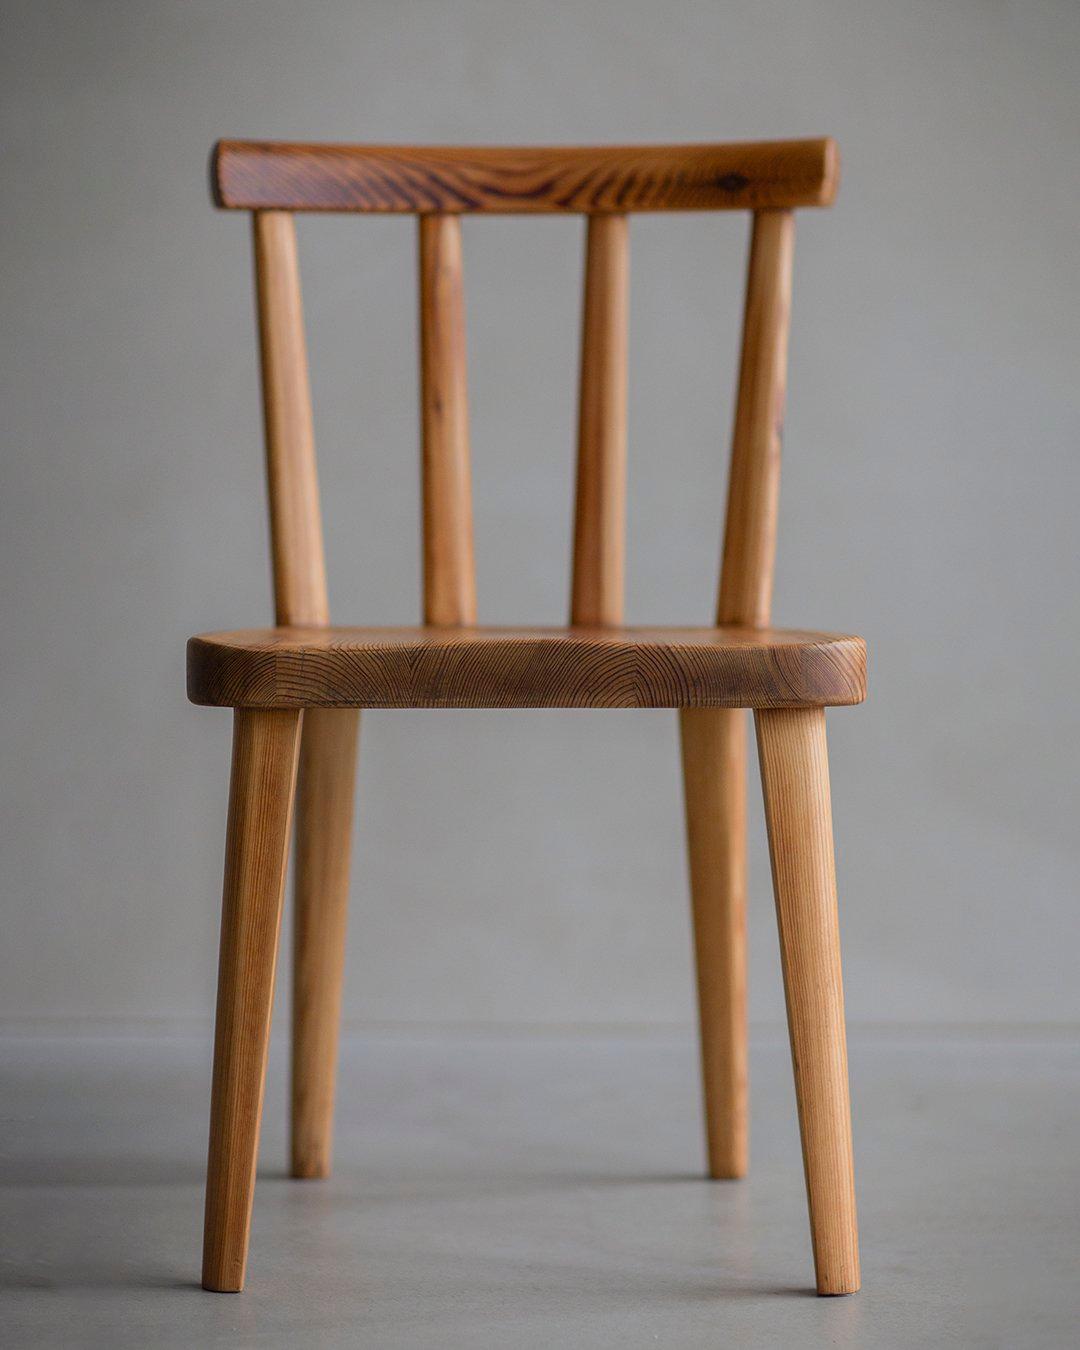 Axel Einar Hjorth - Utö Dining Chair - produced by Nordiska Kompaniet in Sweden In Good Condition For Sale In Hasselt, VLI